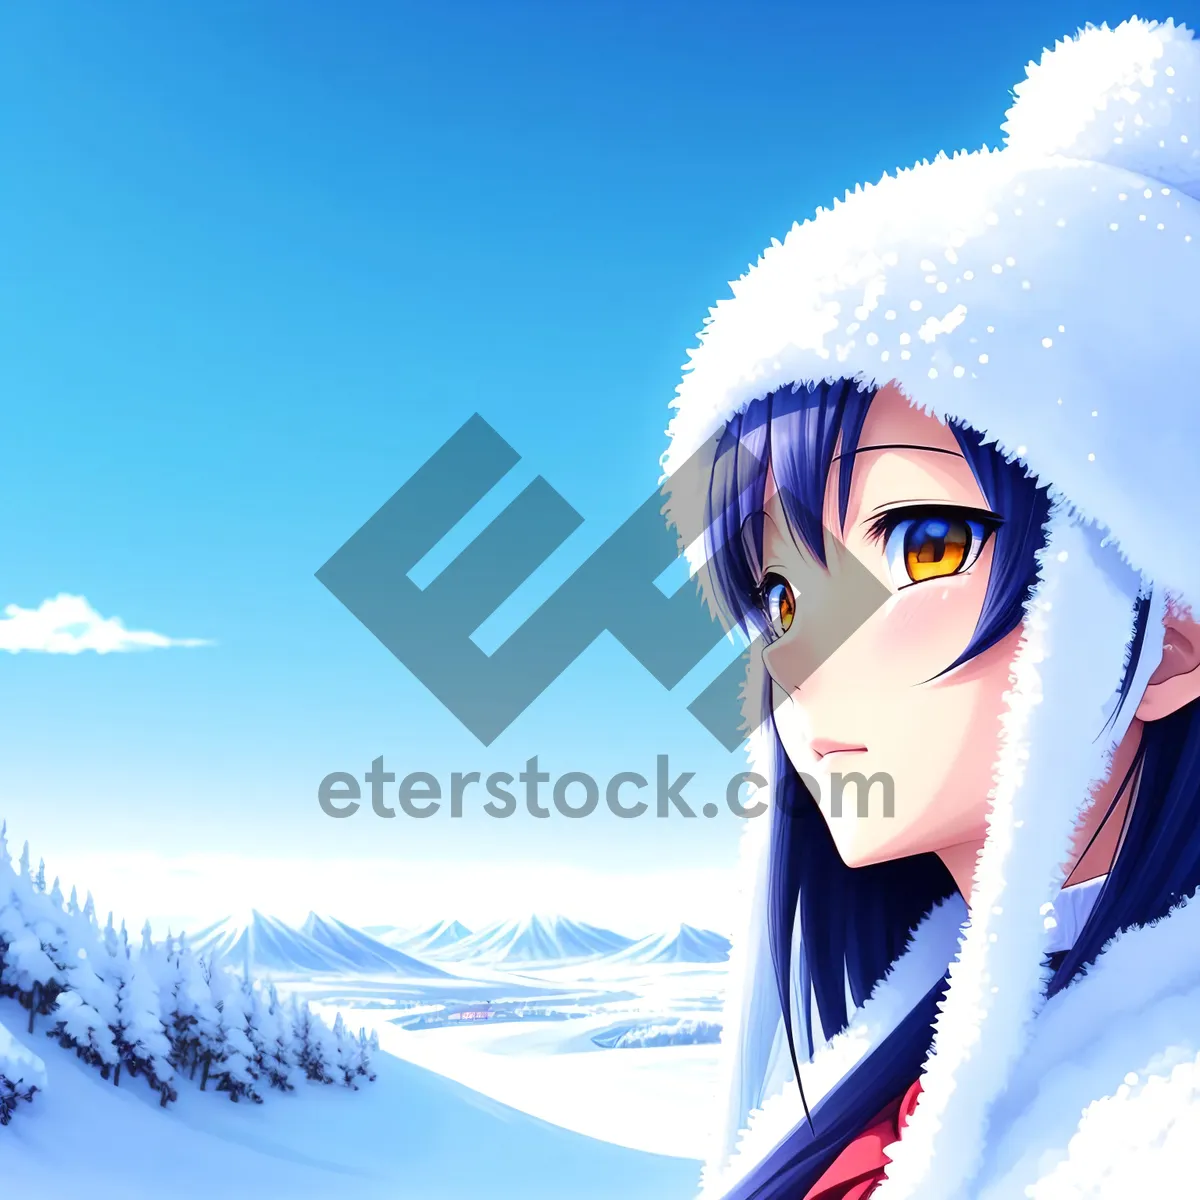 Picture of Joyful Winter Fashion: Pretty Lady with Attractive Hat